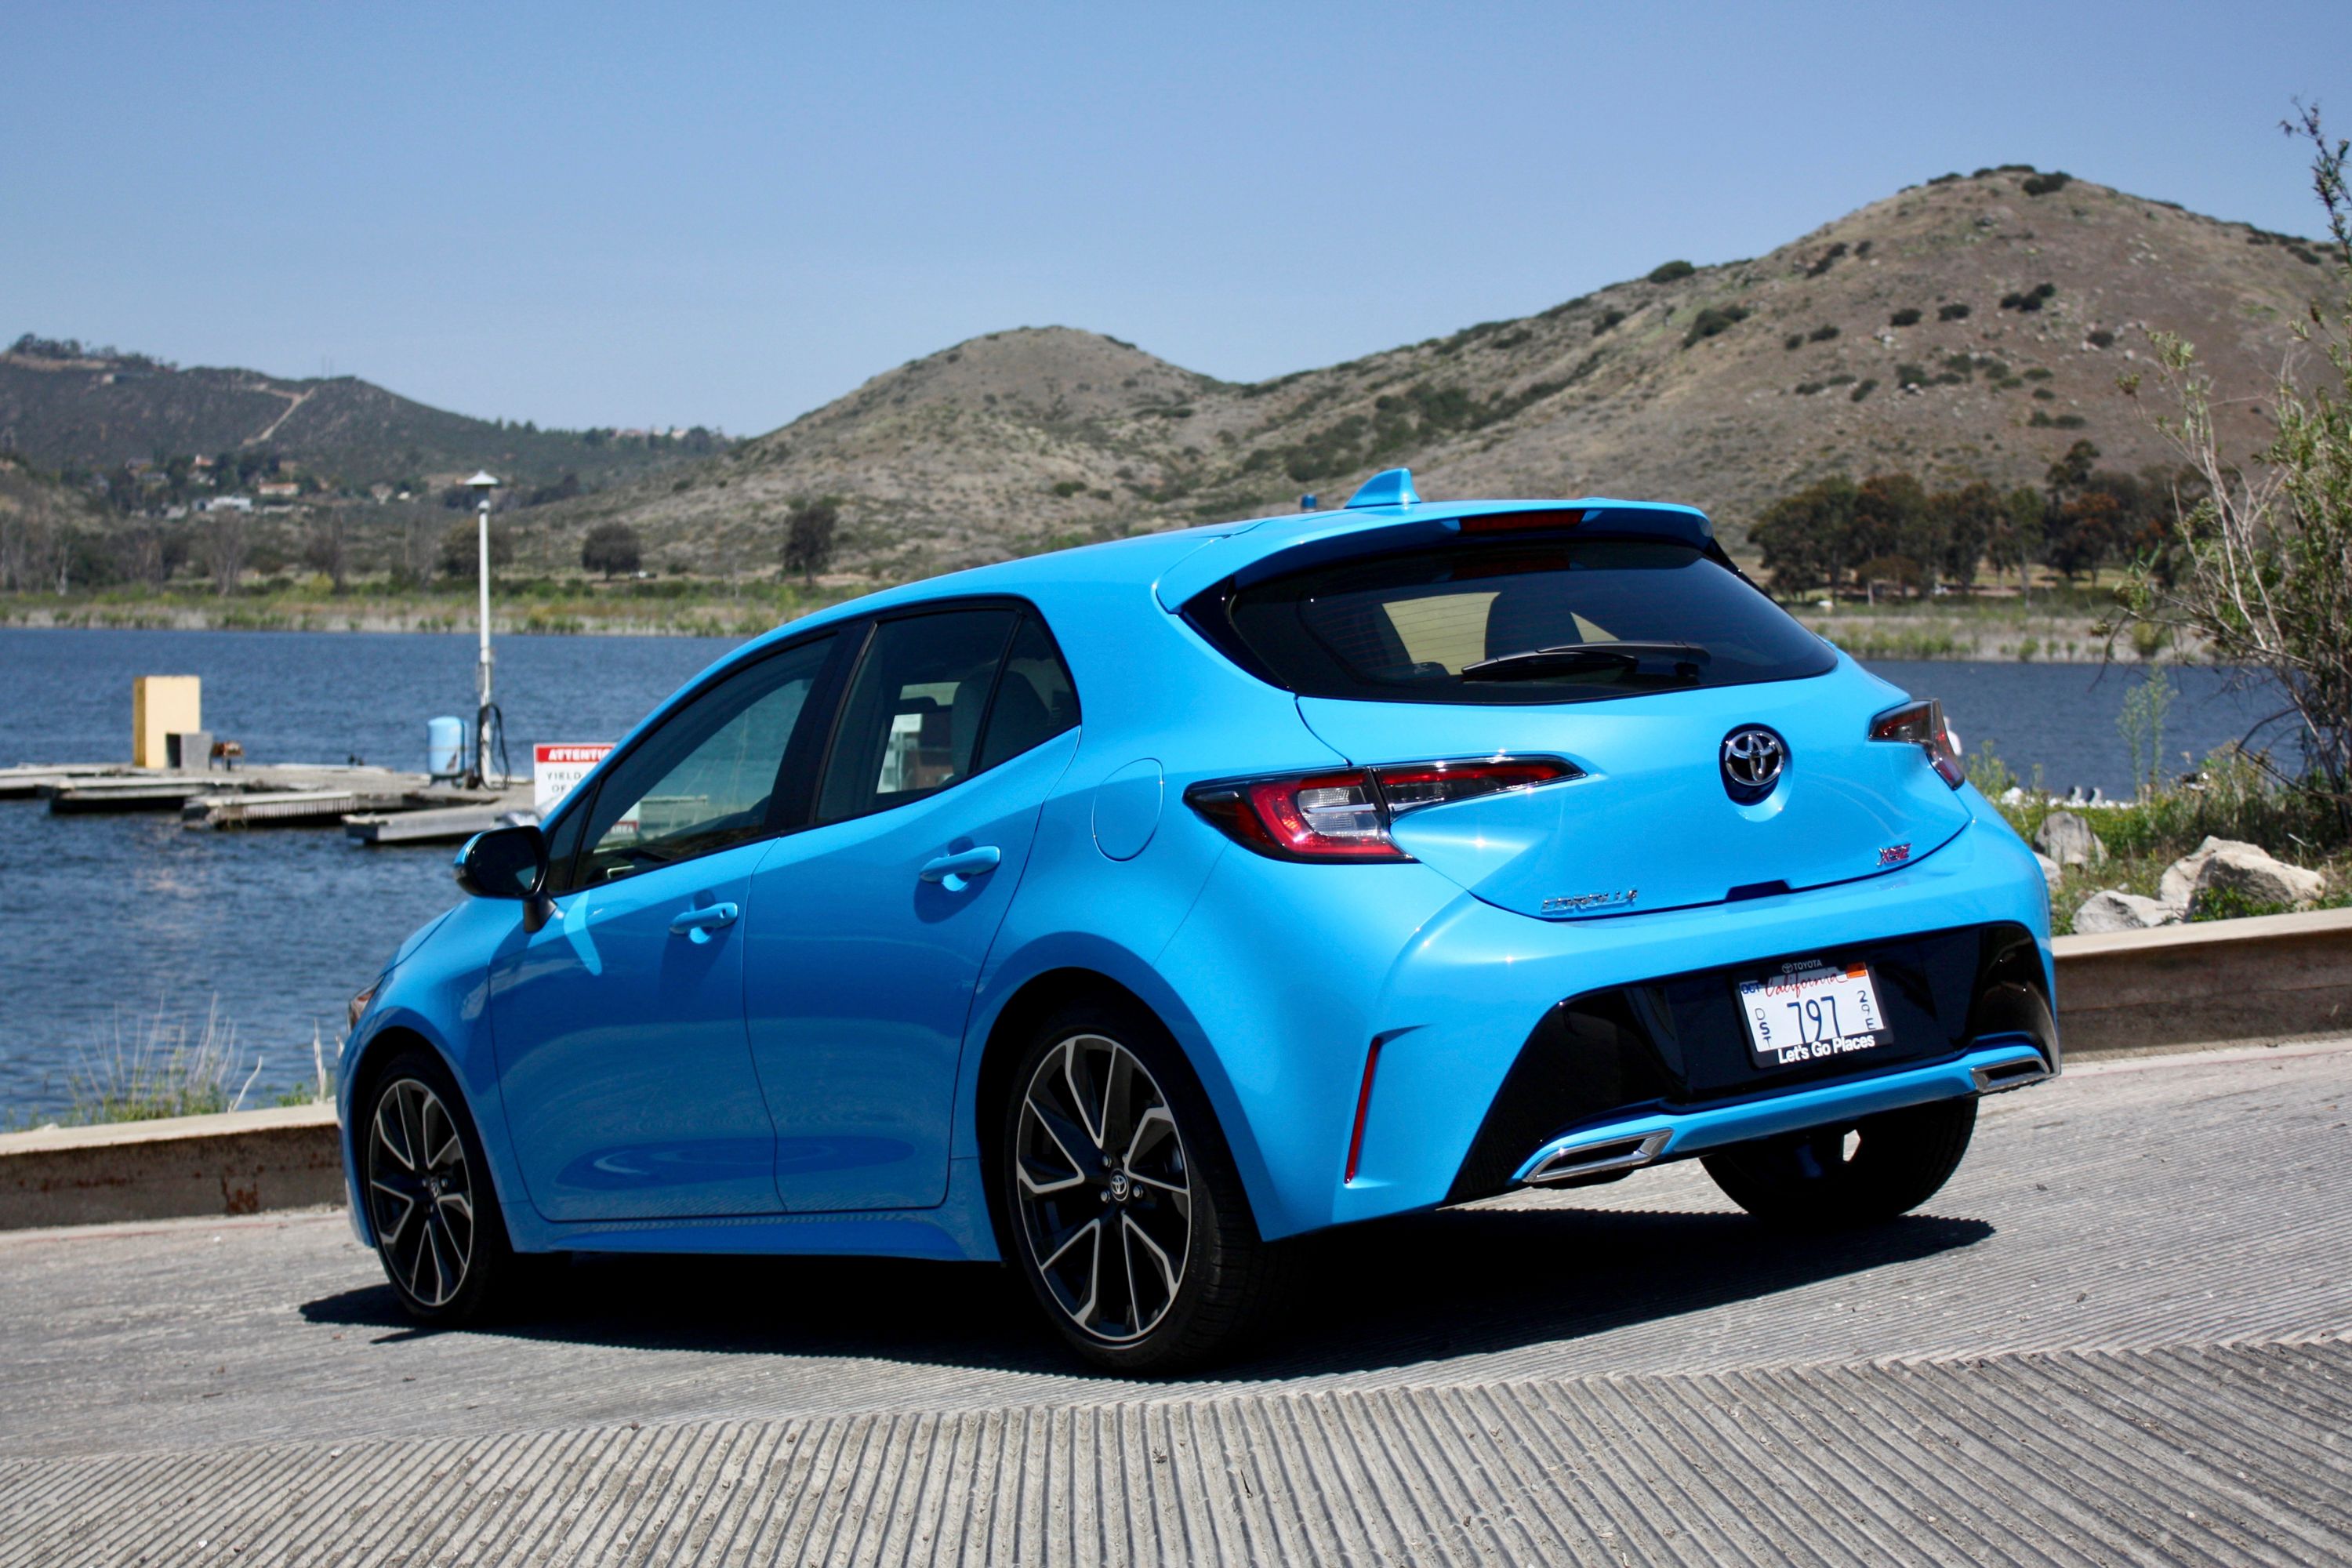 2019 The 2019 Toyota Corolla Hatchback Tickles Our Hot Hatch Fancy